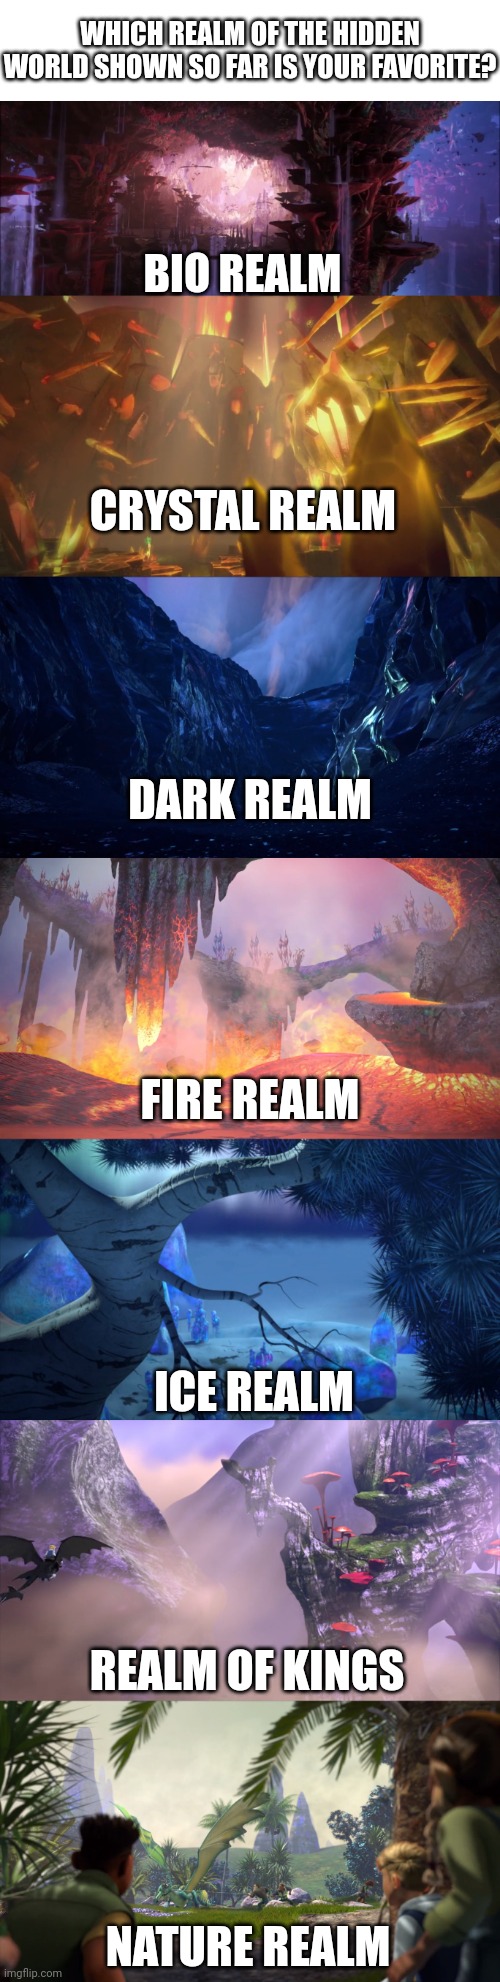 WHICH REALM OF THE HIDDEN WORLD SHOWN SO FAR IS YOUR FAVORITE? BIO REALM; CRYSTAL REALM; DARK REALM; FIRE REALM; ICE REALM; REALM OF KINGS; NATURE REALM | made w/ Imgflip meme maker